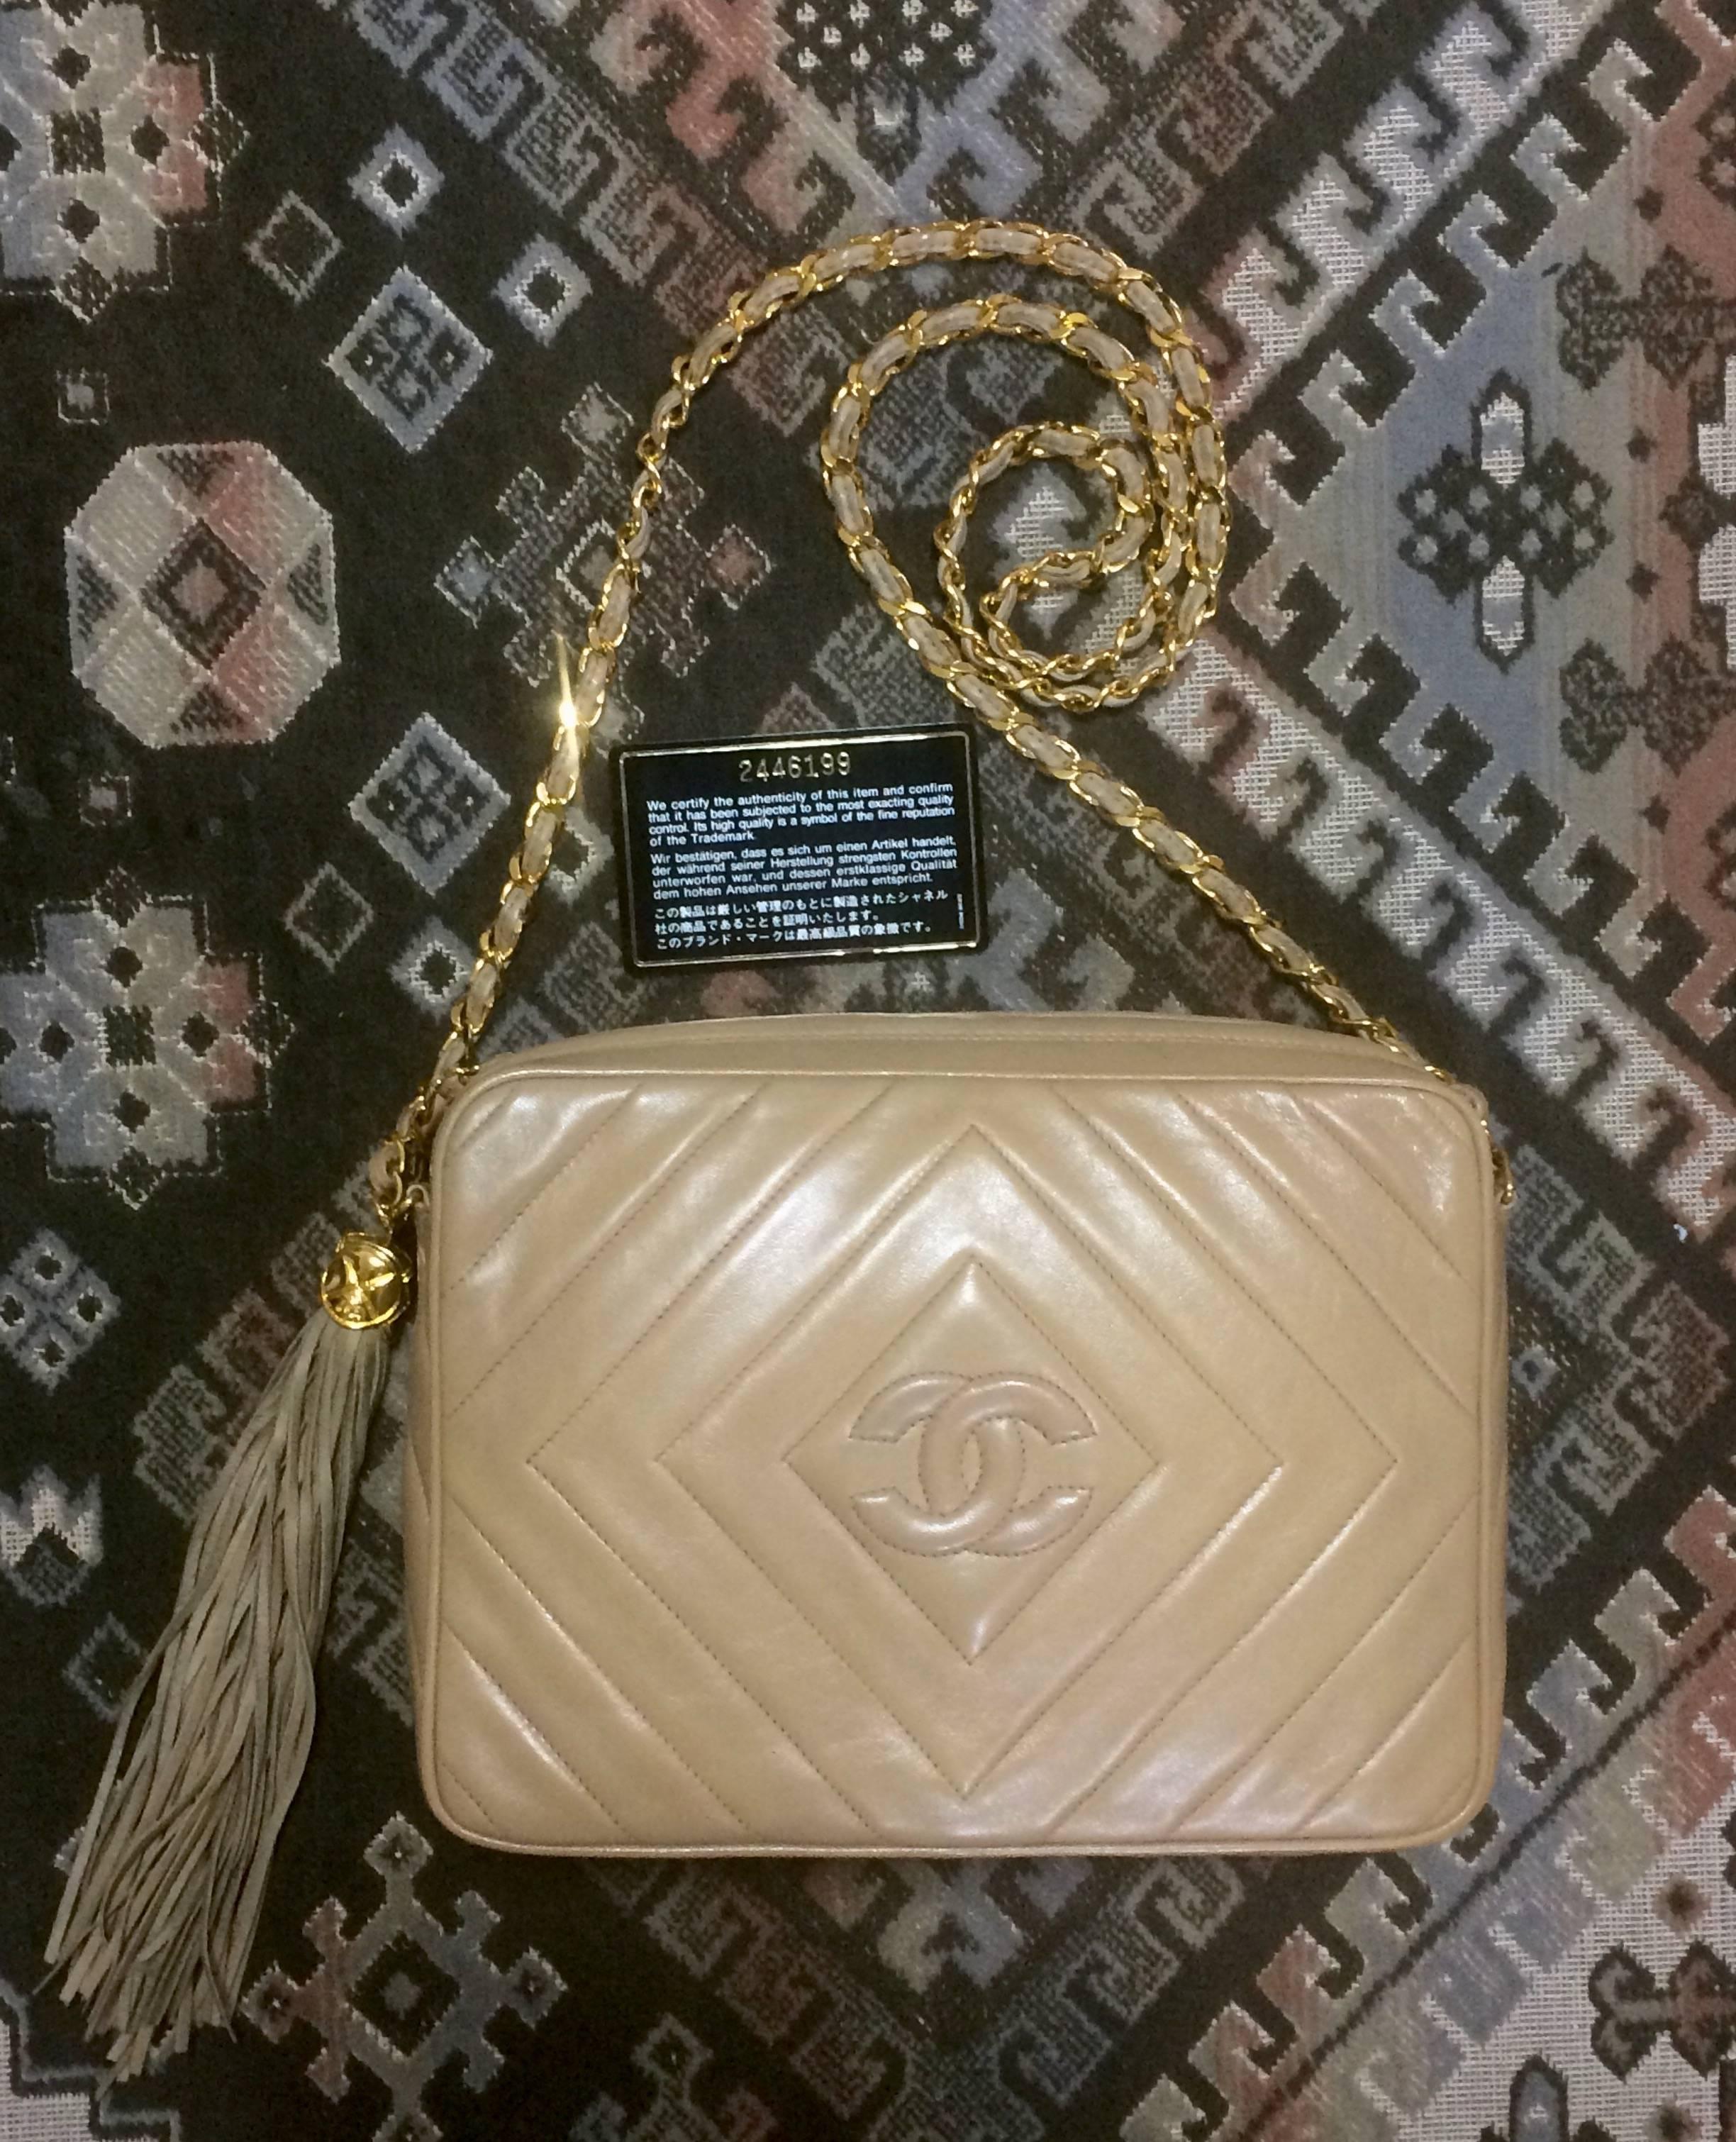 1990s. Vintage Chanel beige lamb leather 2.55 camera bag style chain shoulder bag with fringe and CC stitch mark. Chevron diamond shape stitches.

Introducing another fabulous vintage purse from CHANEL back in the early 90's.

Featuring unique